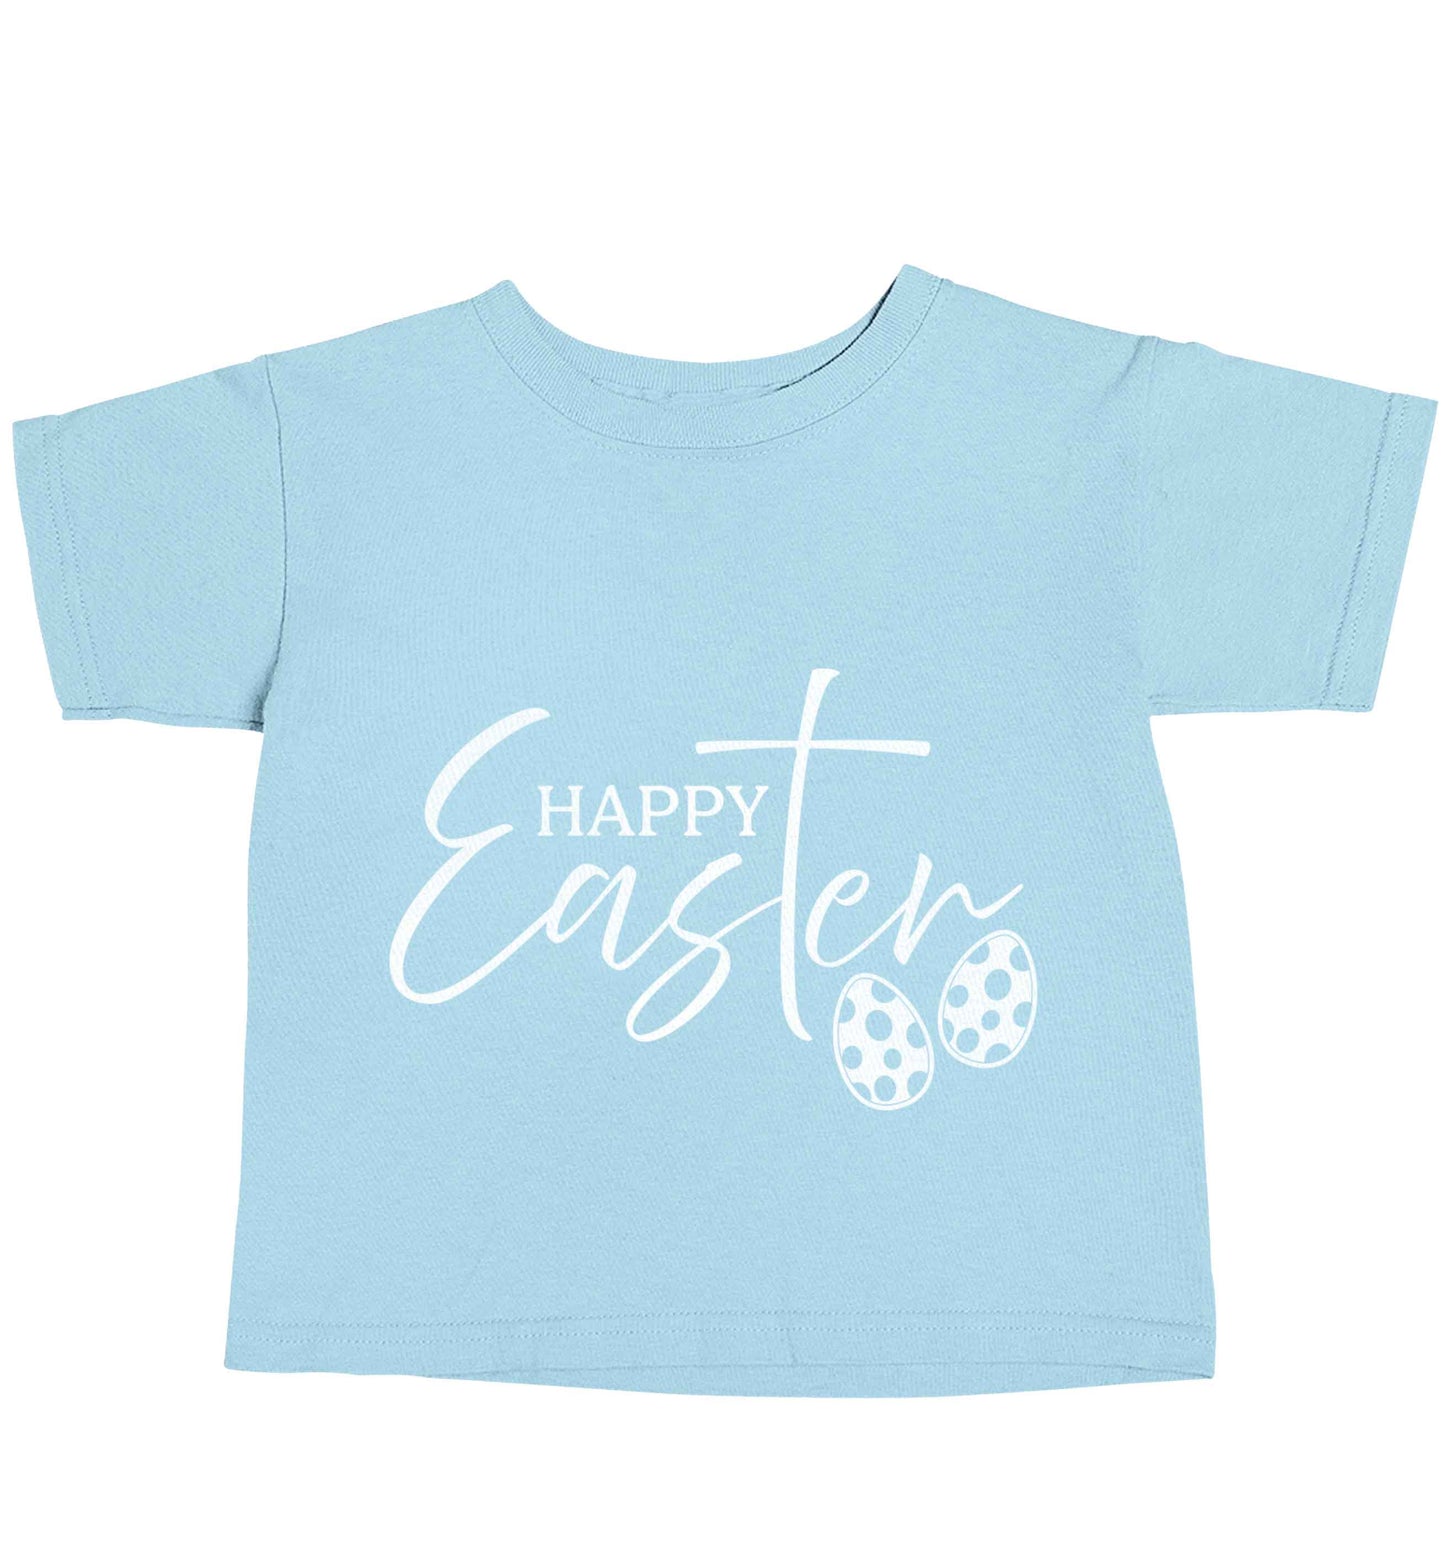 Happy Easter light blue baby toddler Tshirt 2 Years